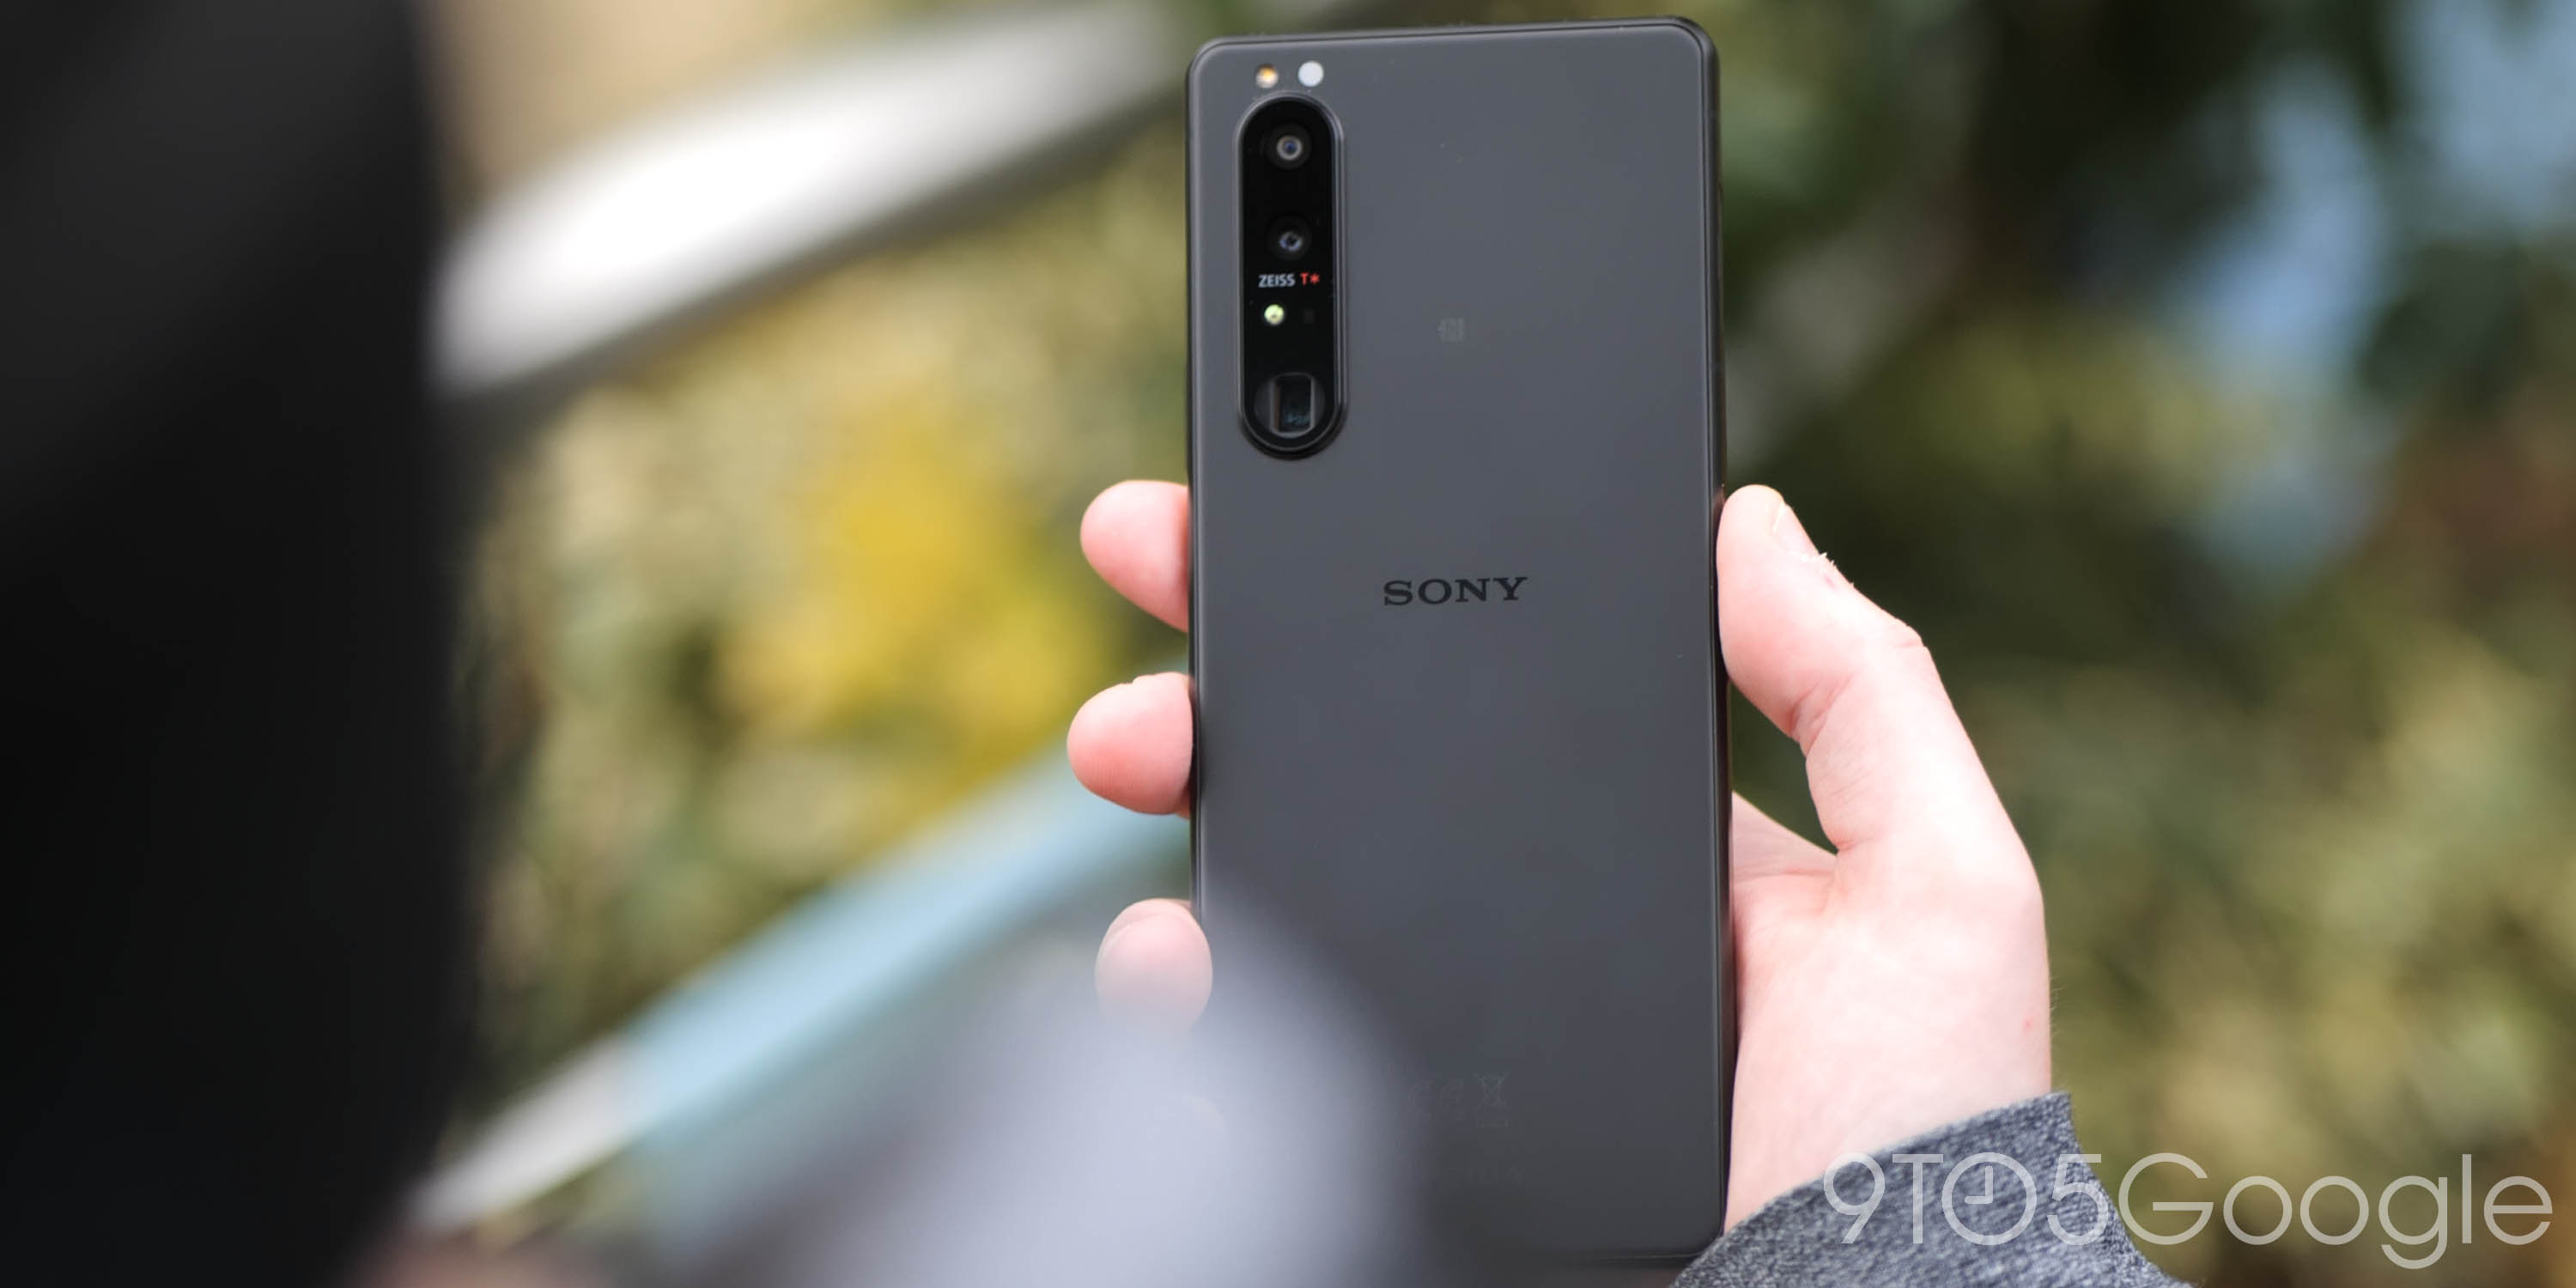 Deals: Sony Xperia 1 III Android Smartphone now $300 off, Galaxy 